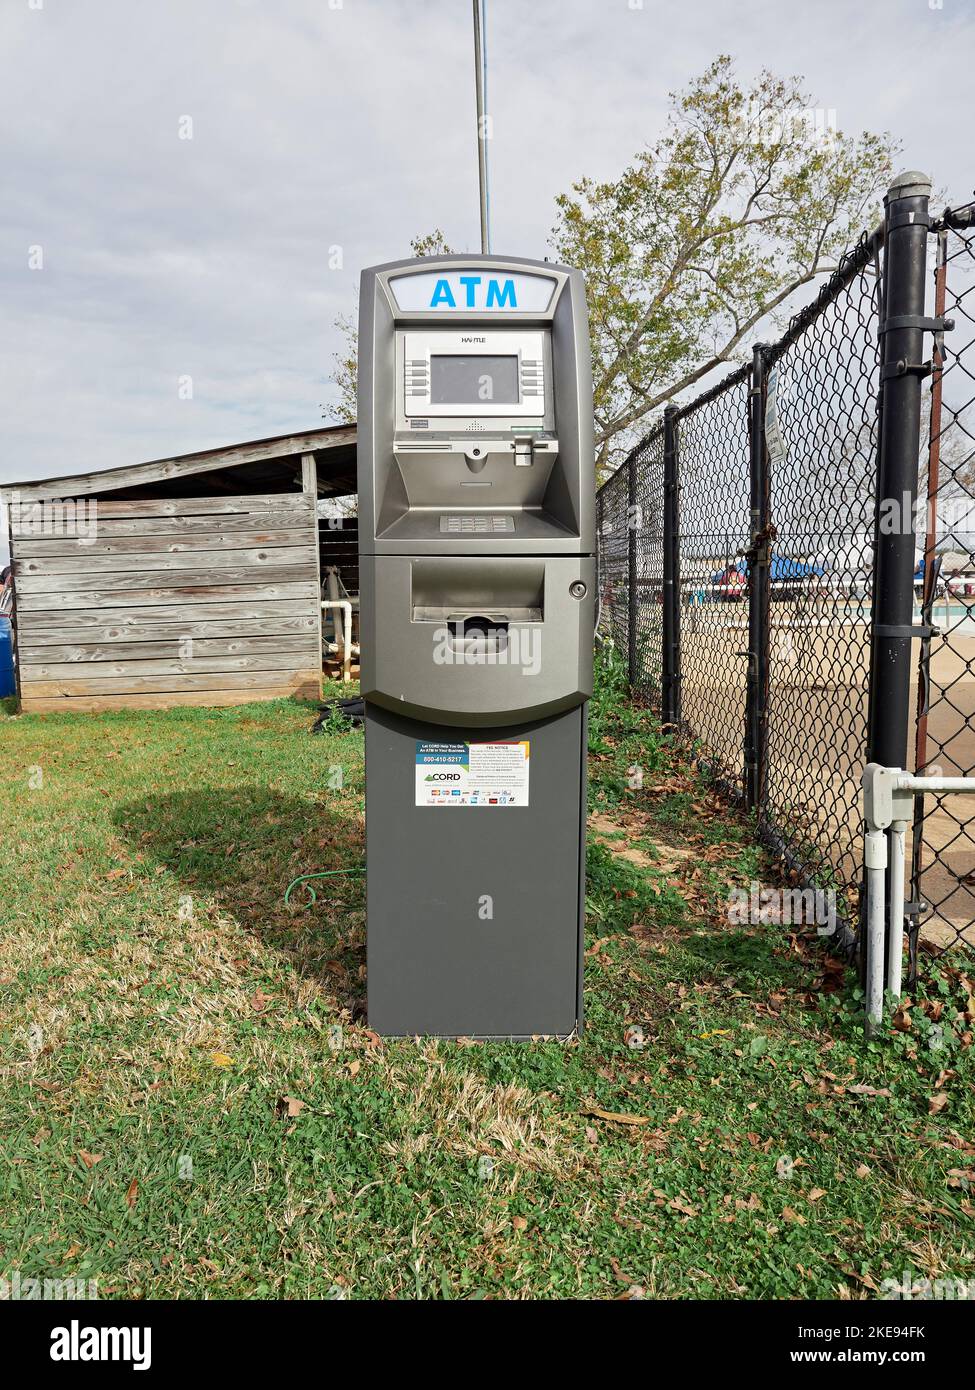 Portable remote, stand alone,  walk up ATM cash machine at a local event. Stock Photo